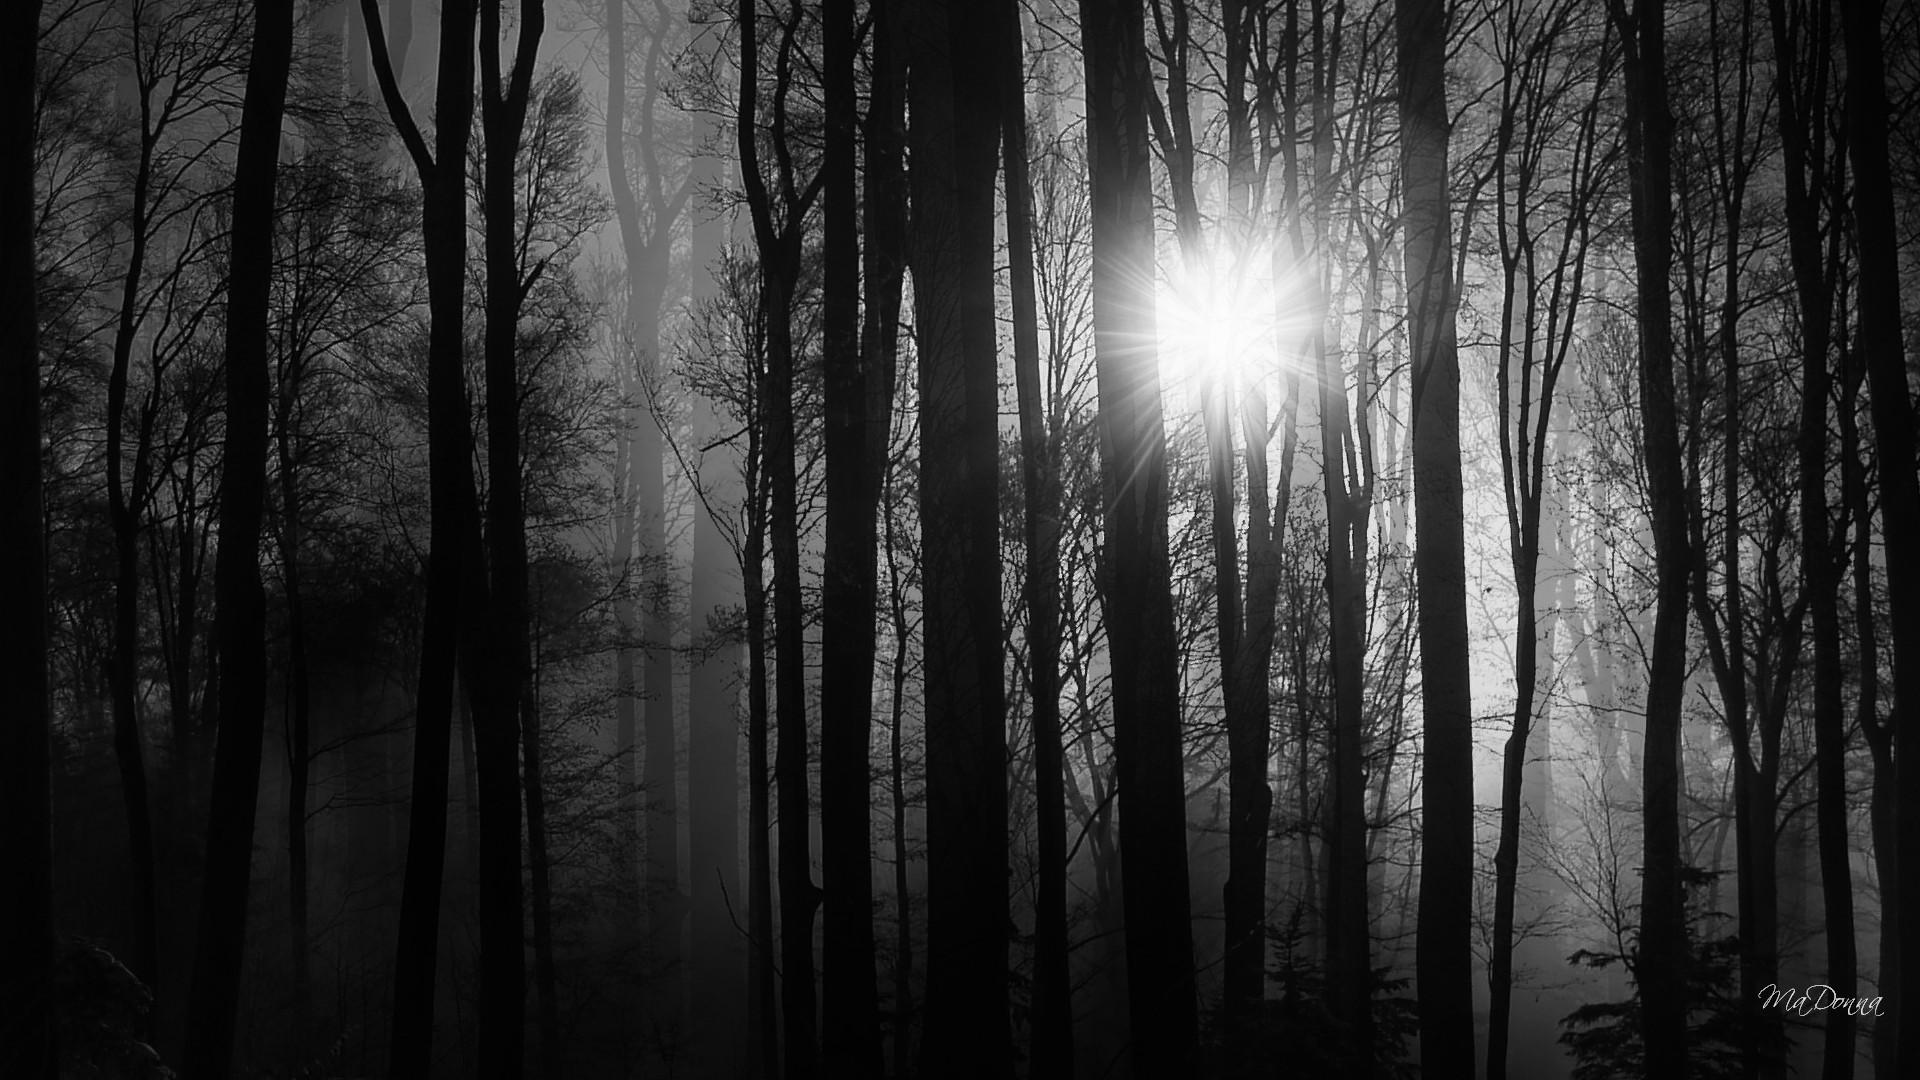 Black and White Woods Wallpapers - Top Free Black and White Woods ...